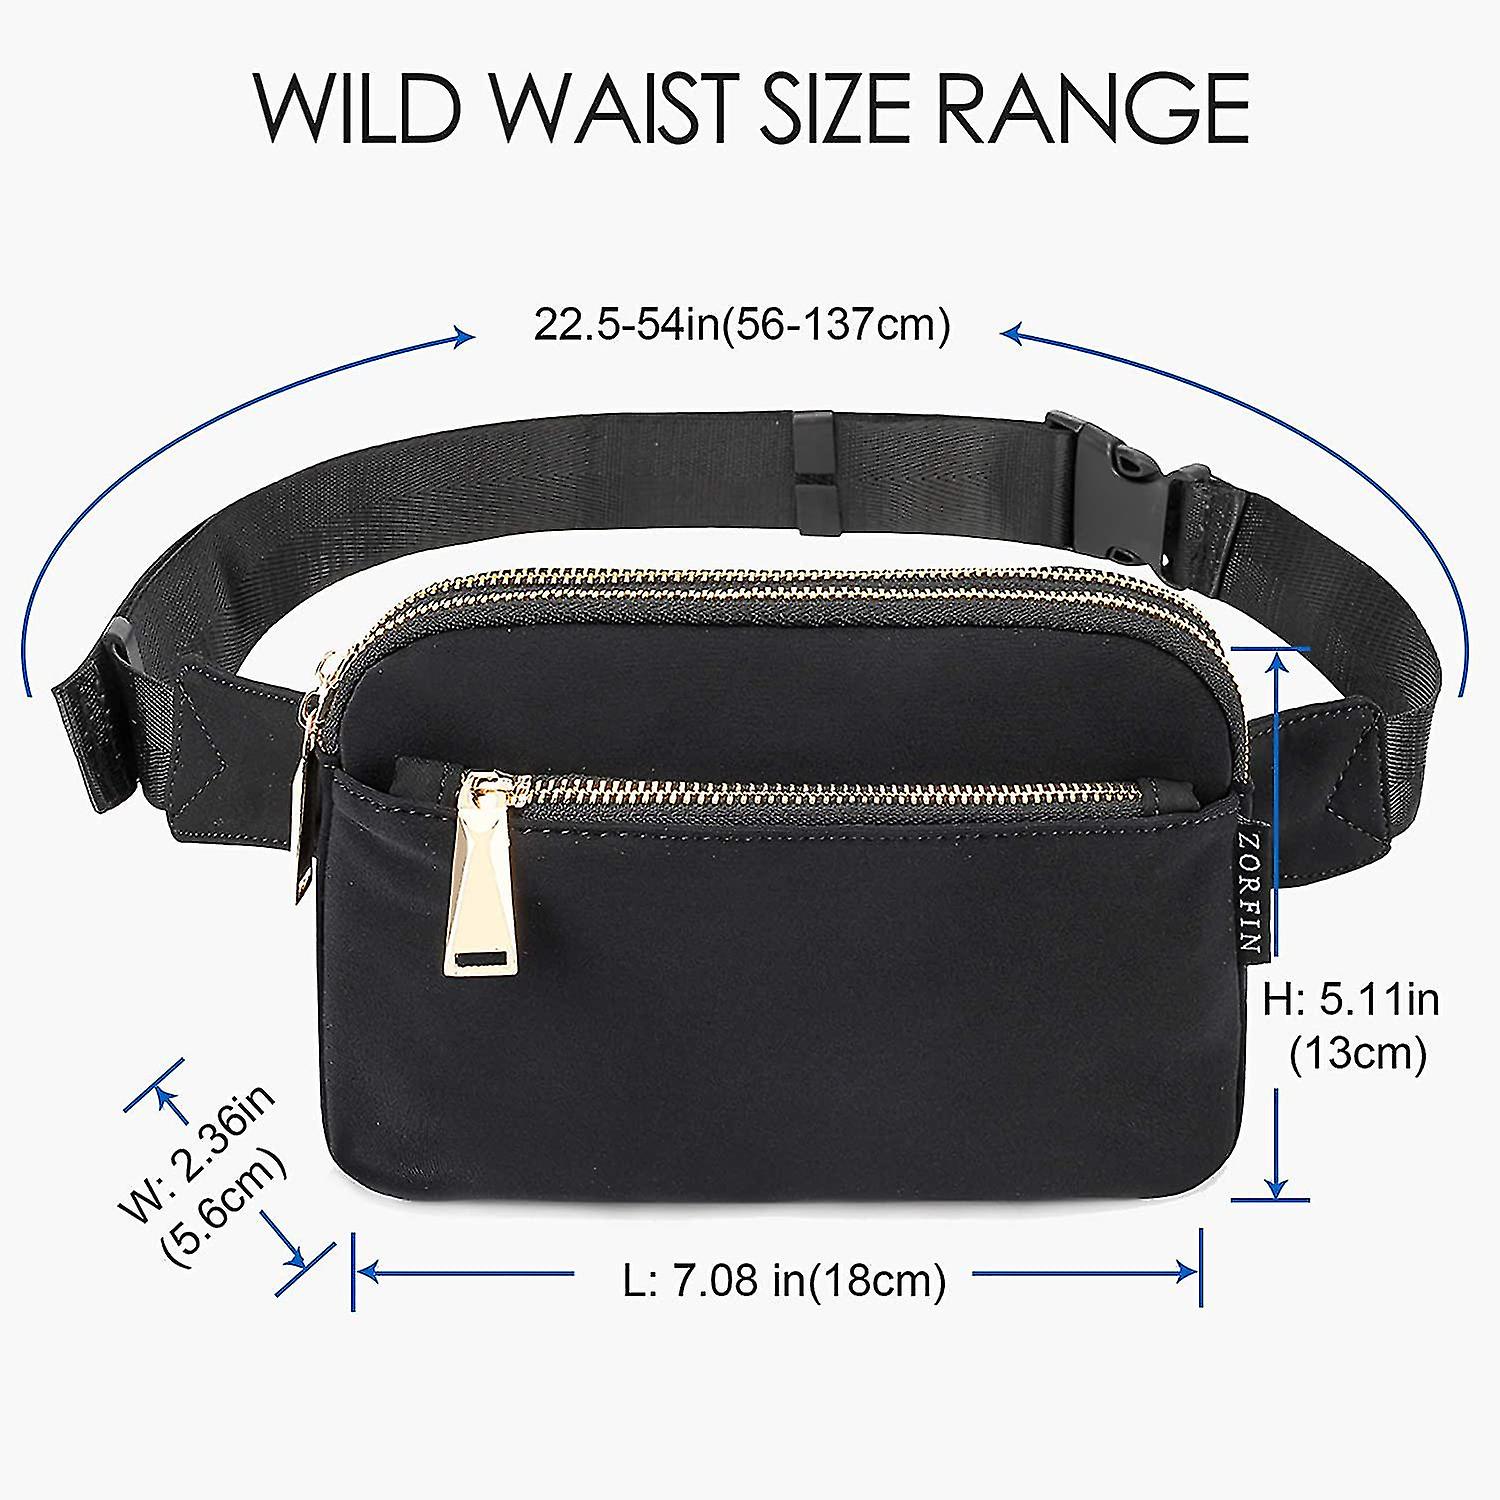 Fanny Packs For Women Men， Black Crossbody Fanny Pack， Belt Bag With Adjustable Strap， Fashion Waist Pack For Outdoors/workout/traveling/casual/runnin